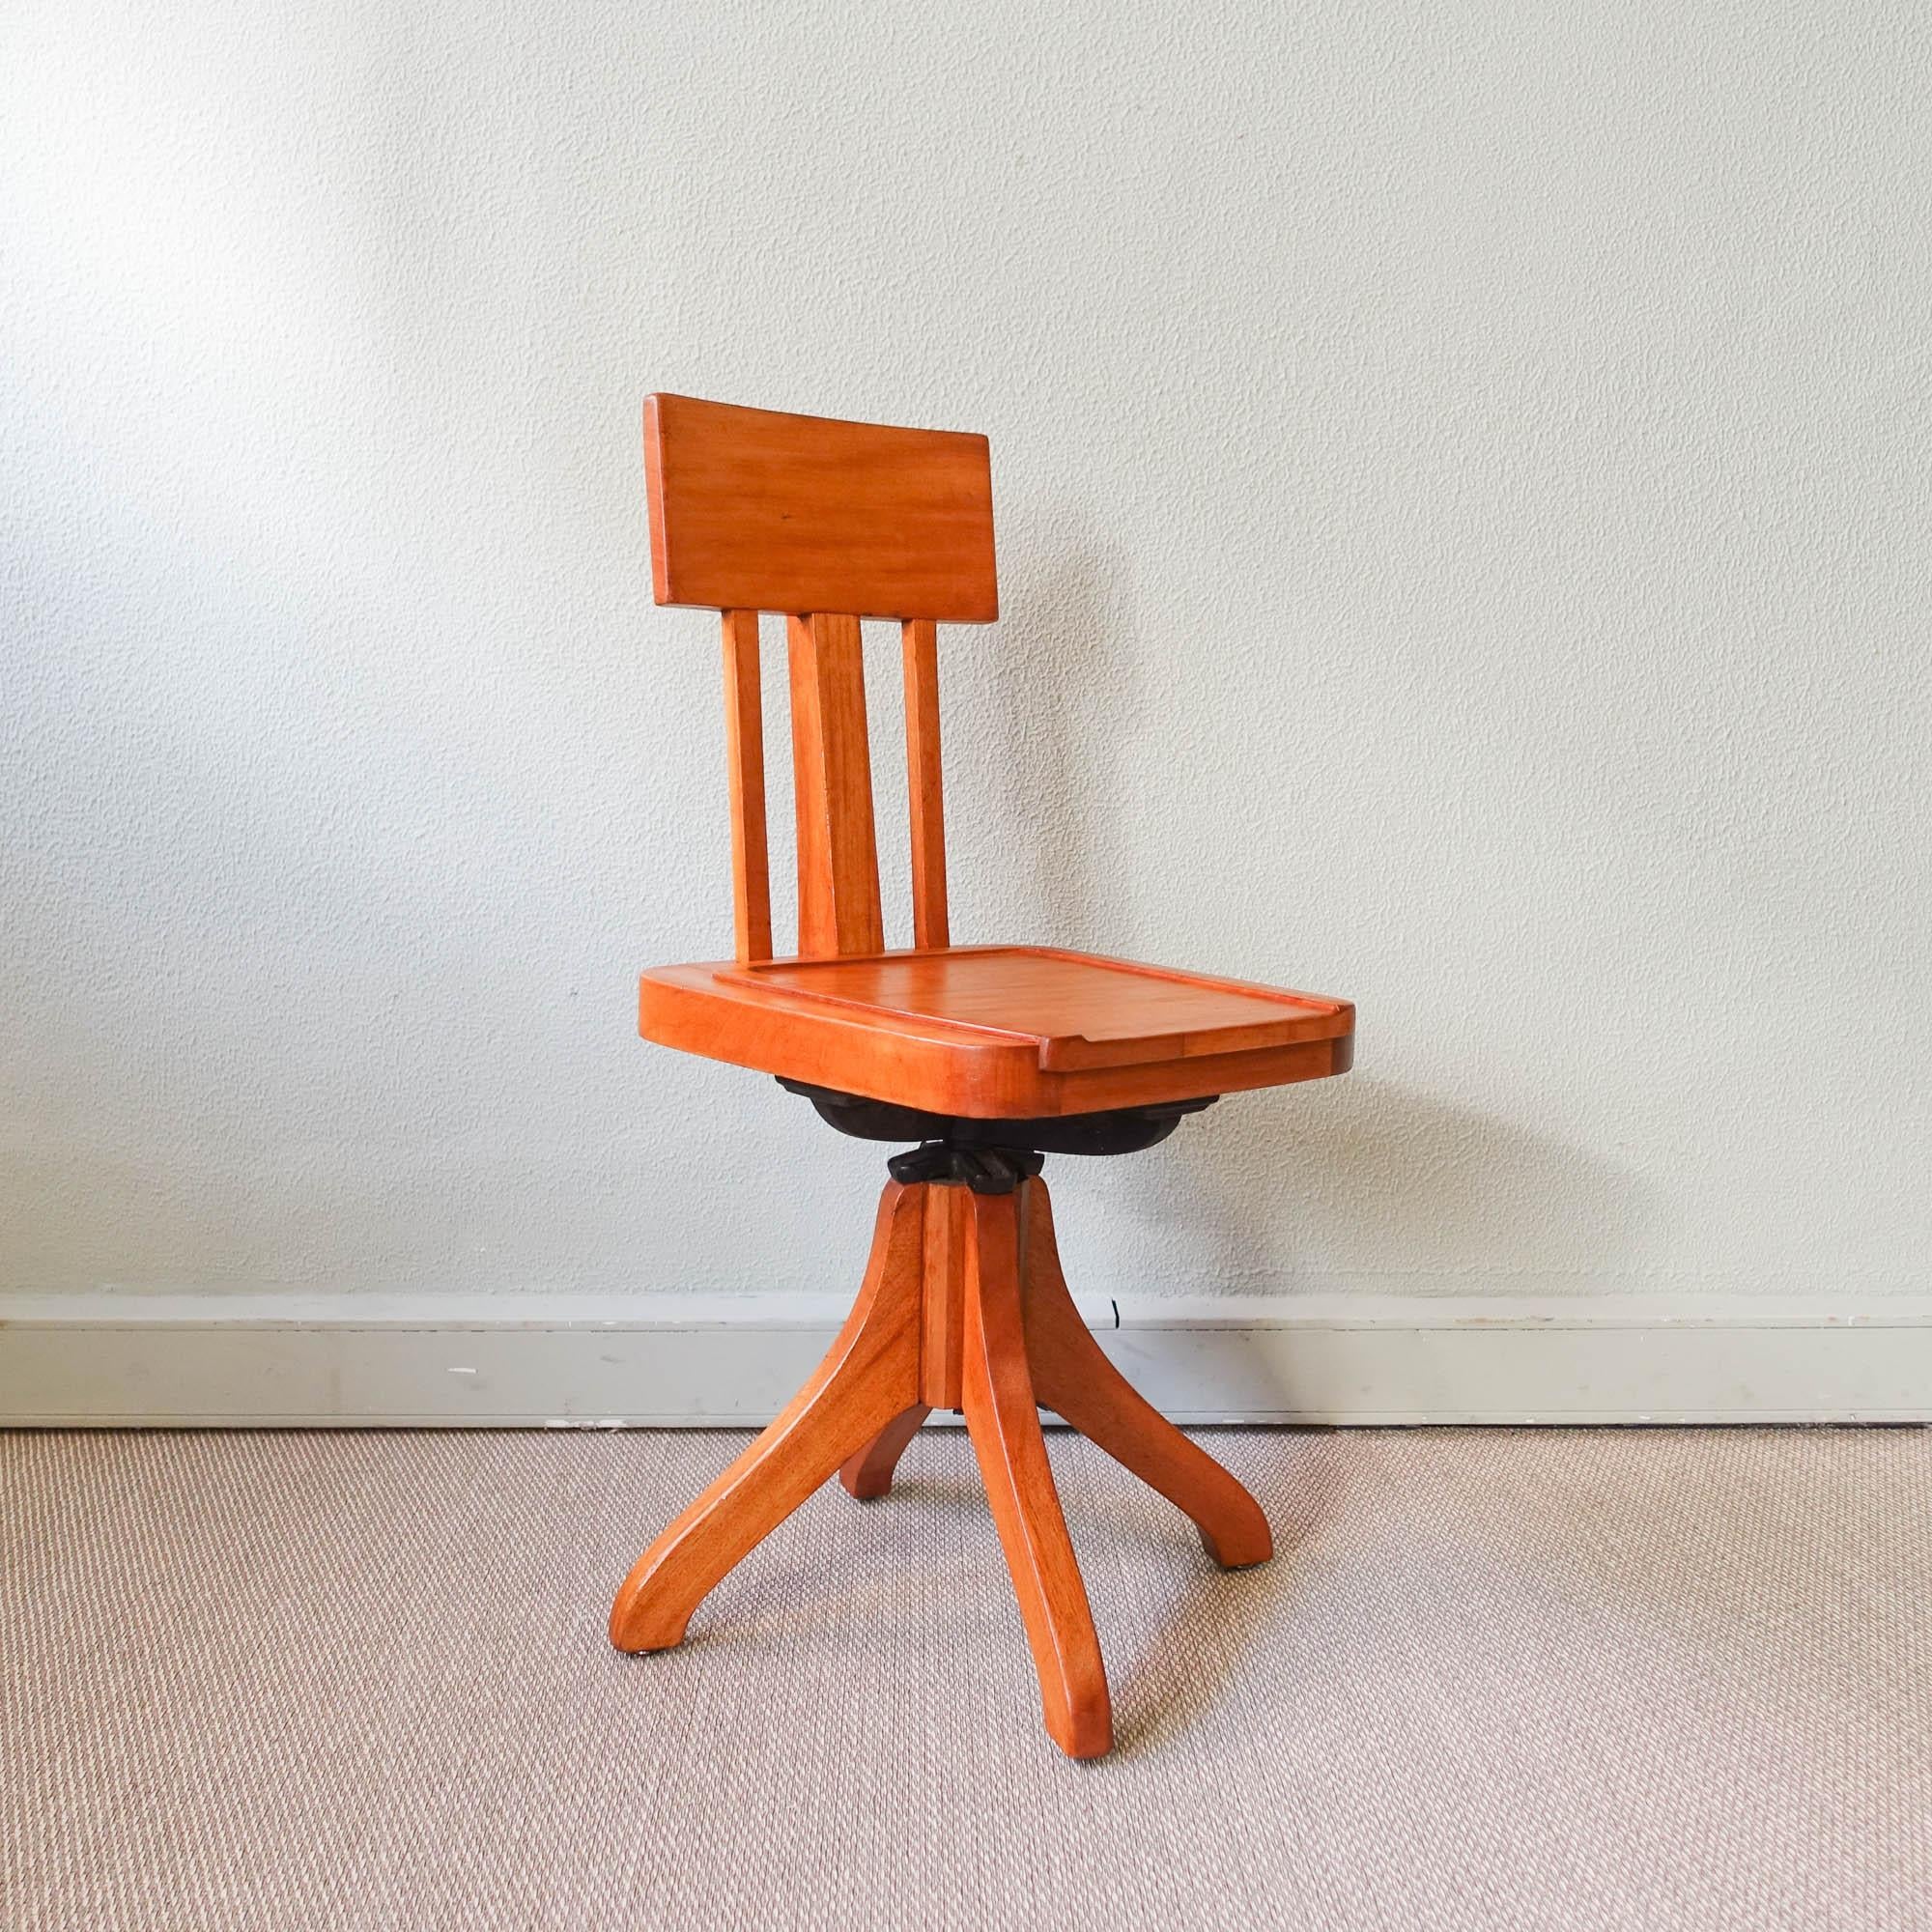 Beech Typist Chair, Model Simples, by Móveis Olaio, 1940's For Sale